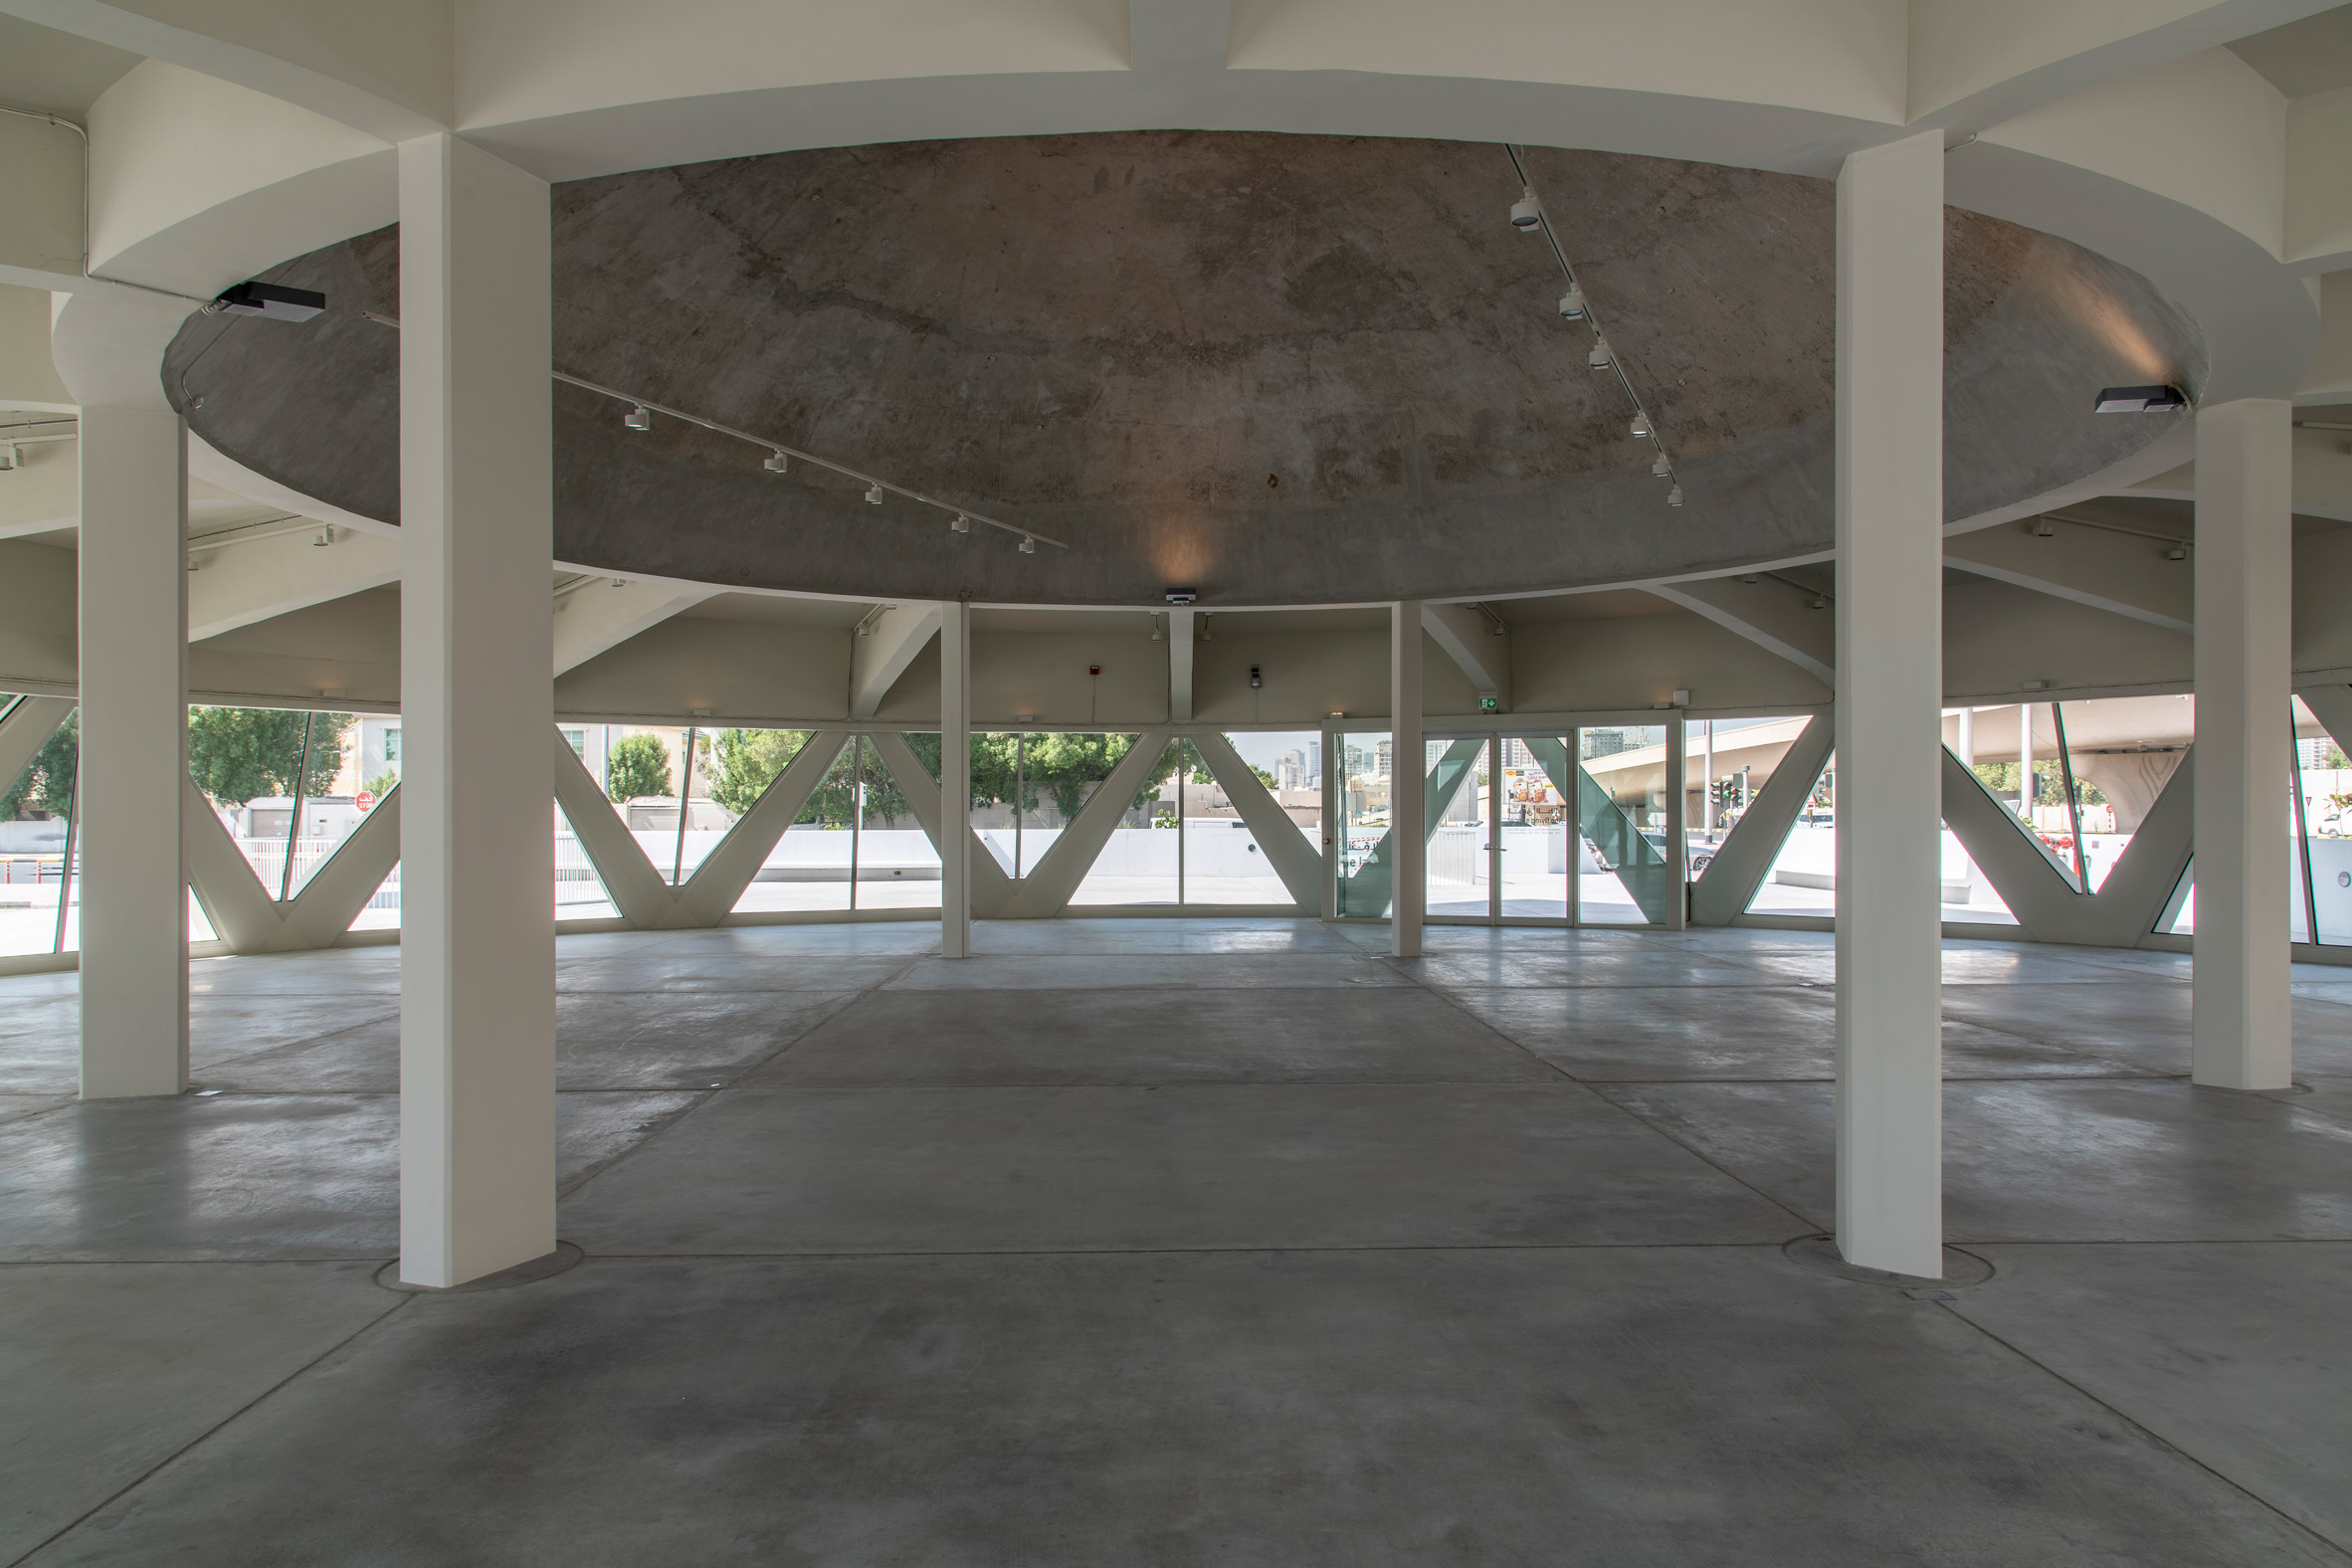 Concrete dome in Sharjah